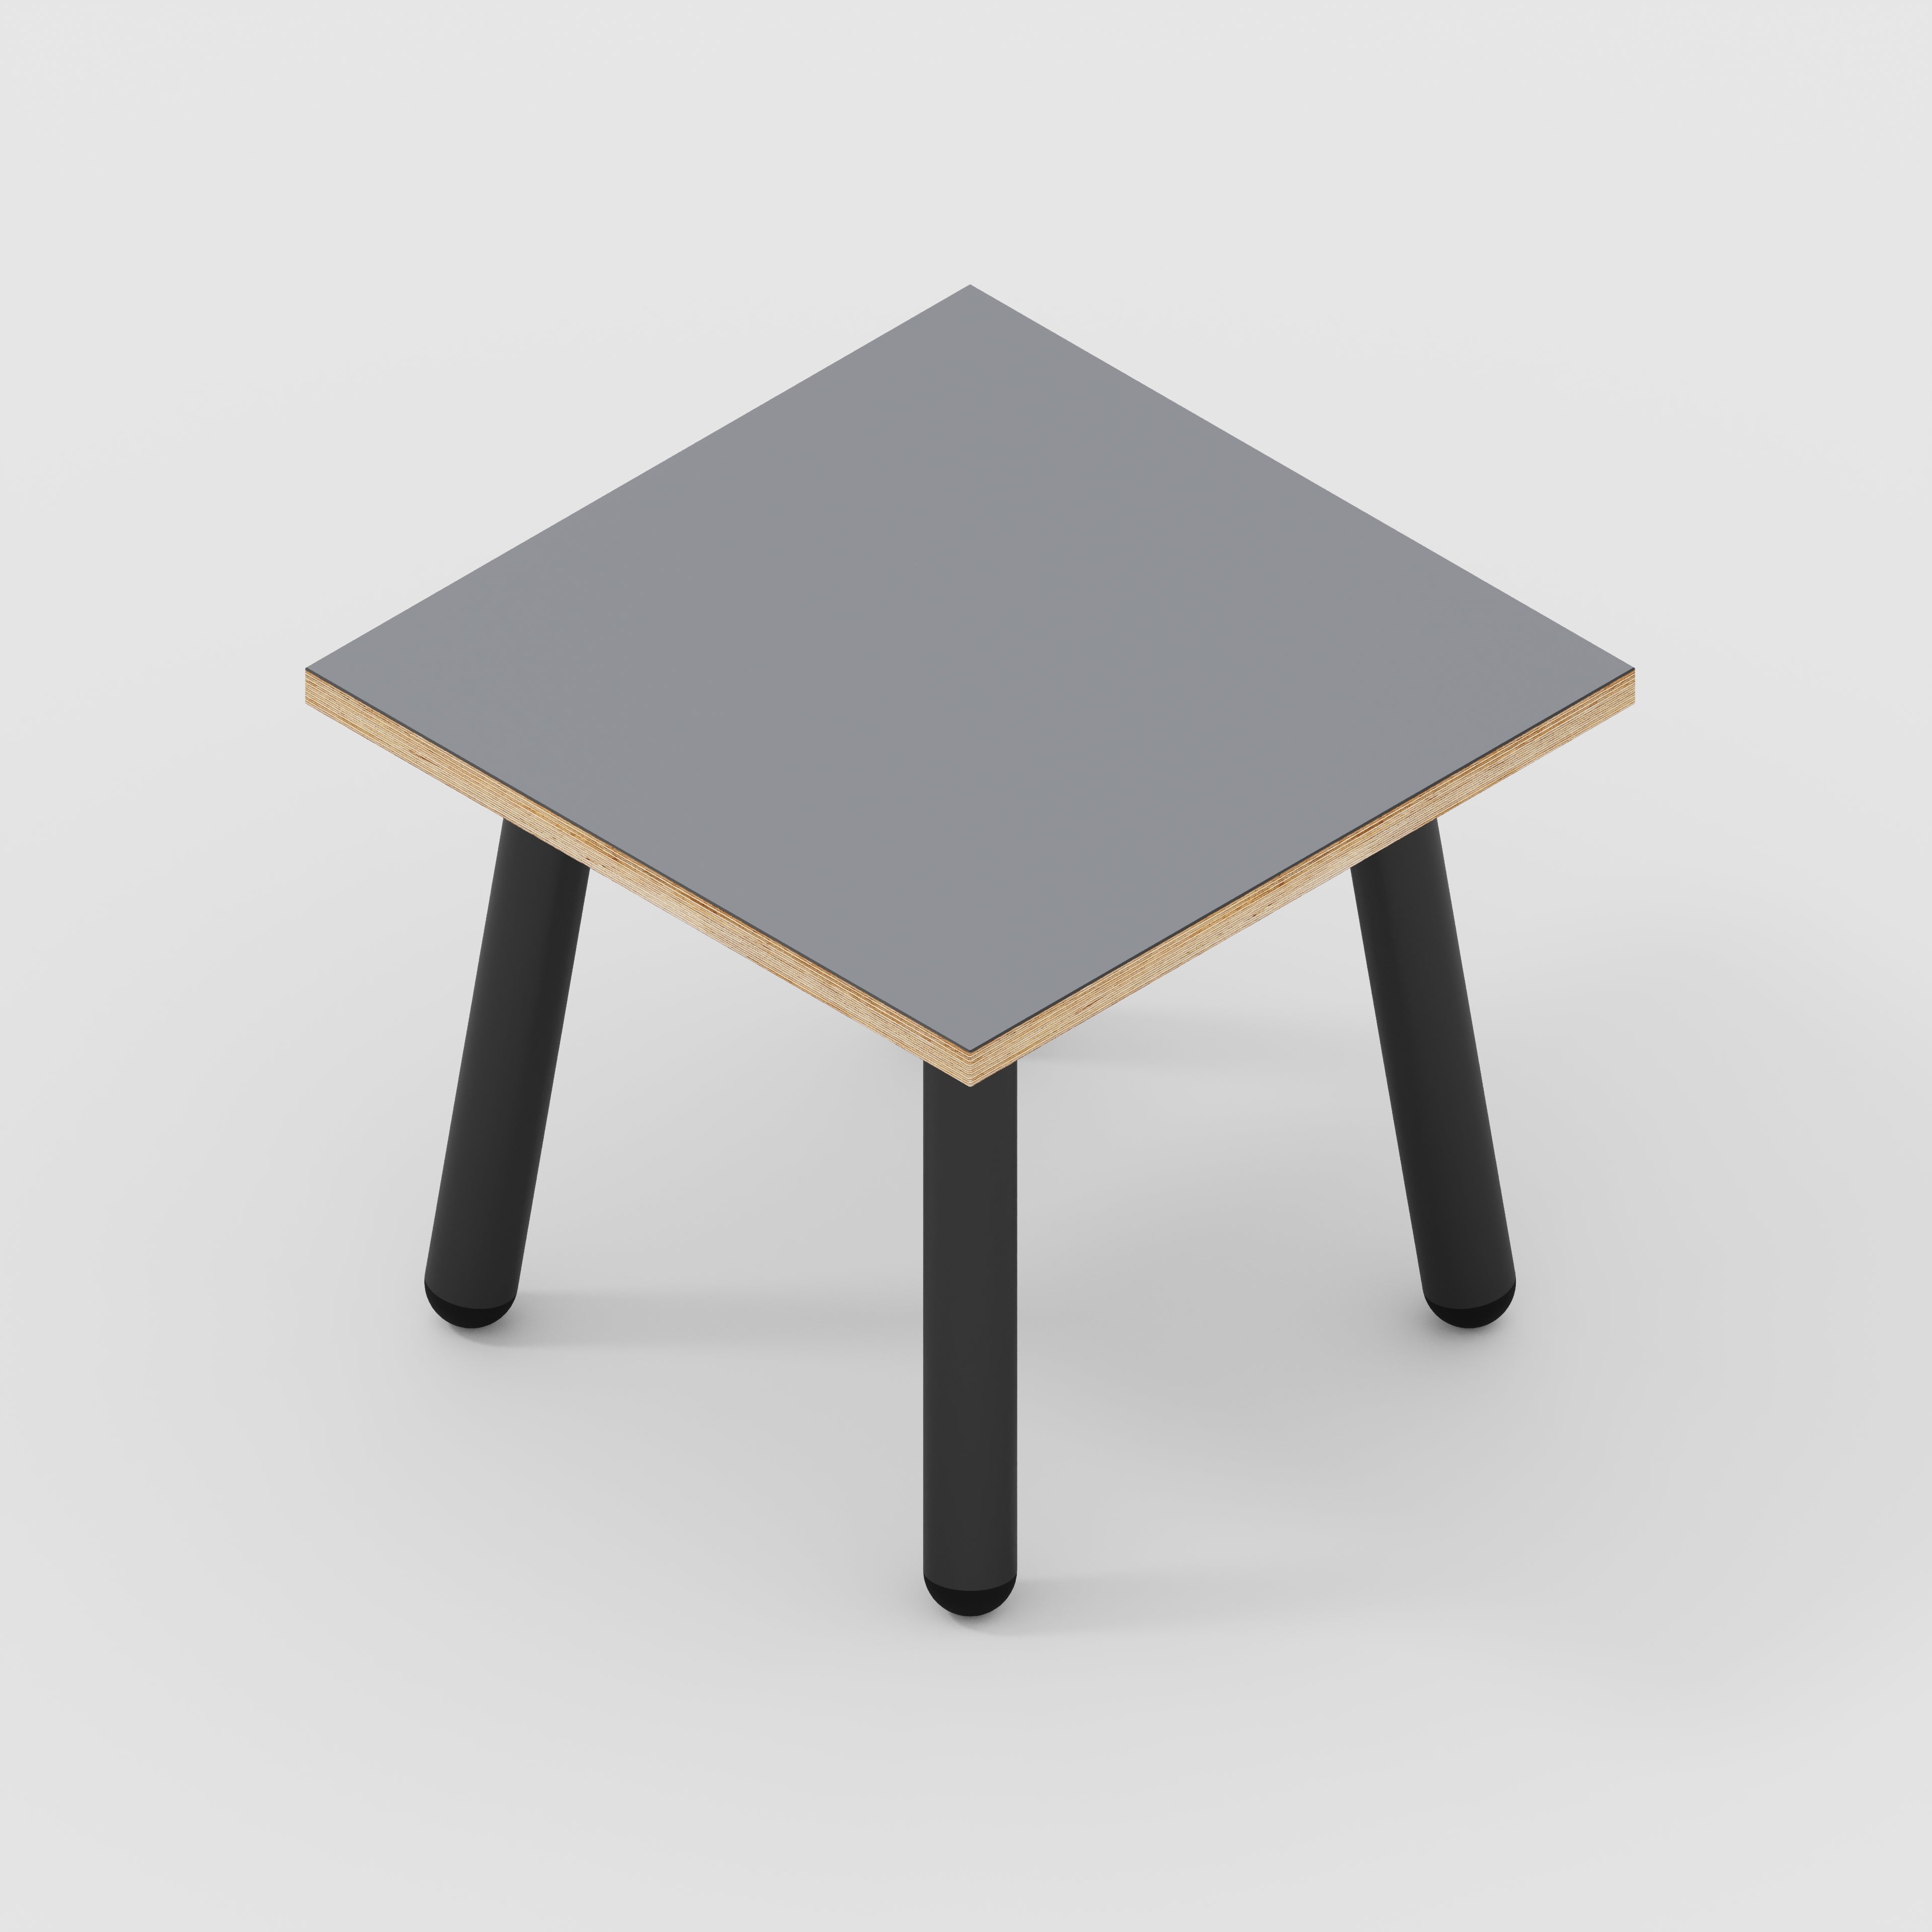 Side Table with Round Single Pin Legs - Formica Tornado Grey - 500(w) x 500(d) x 425(h)